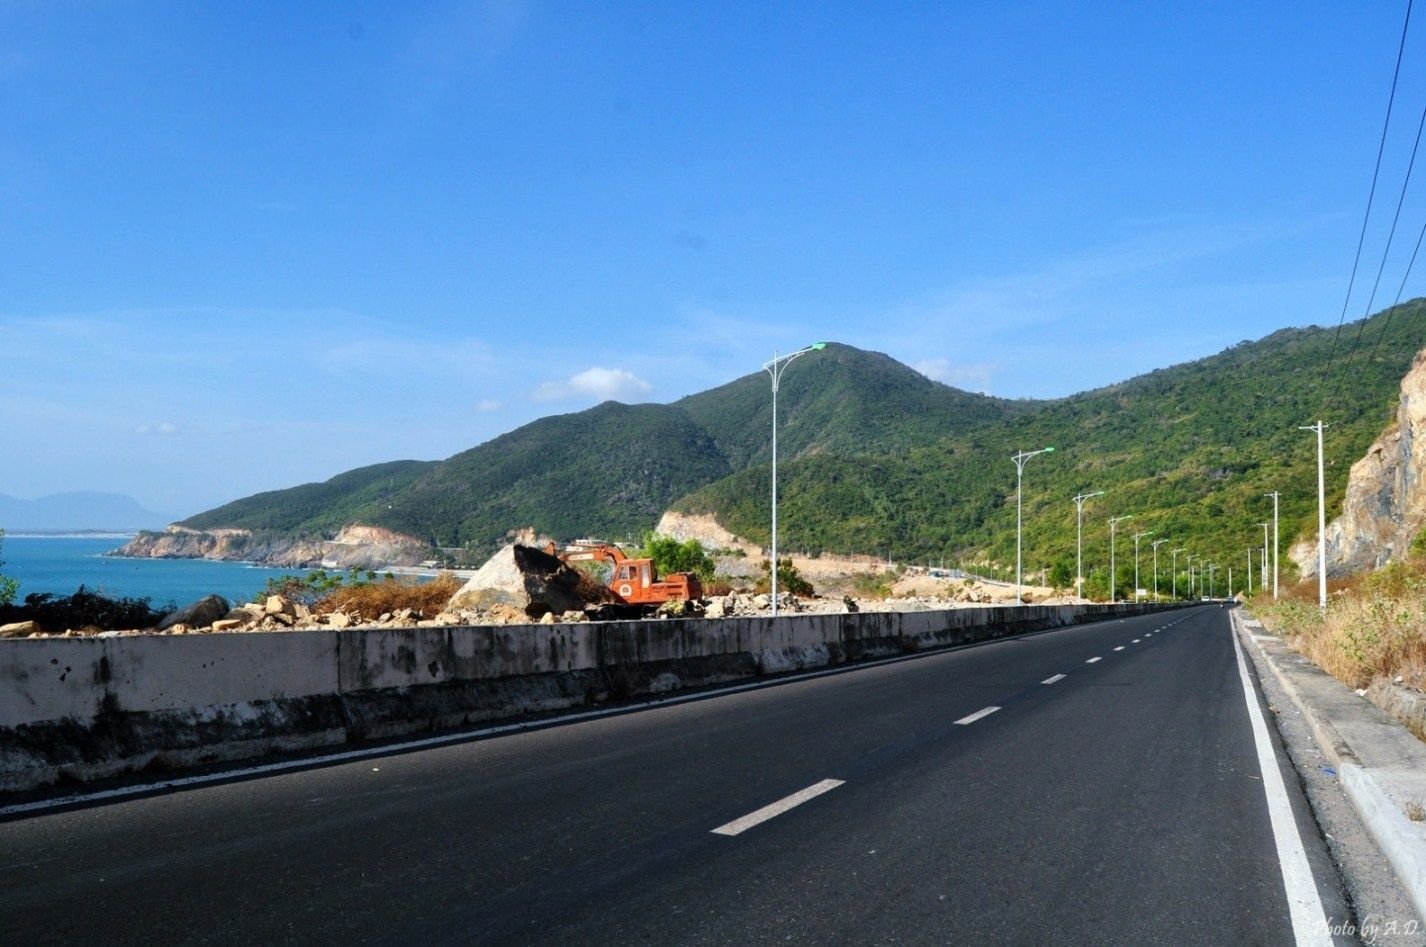 The road from Nha Trang to Cam Ranh Bay is very easy, with many beautiful scenes on both sides of the road 